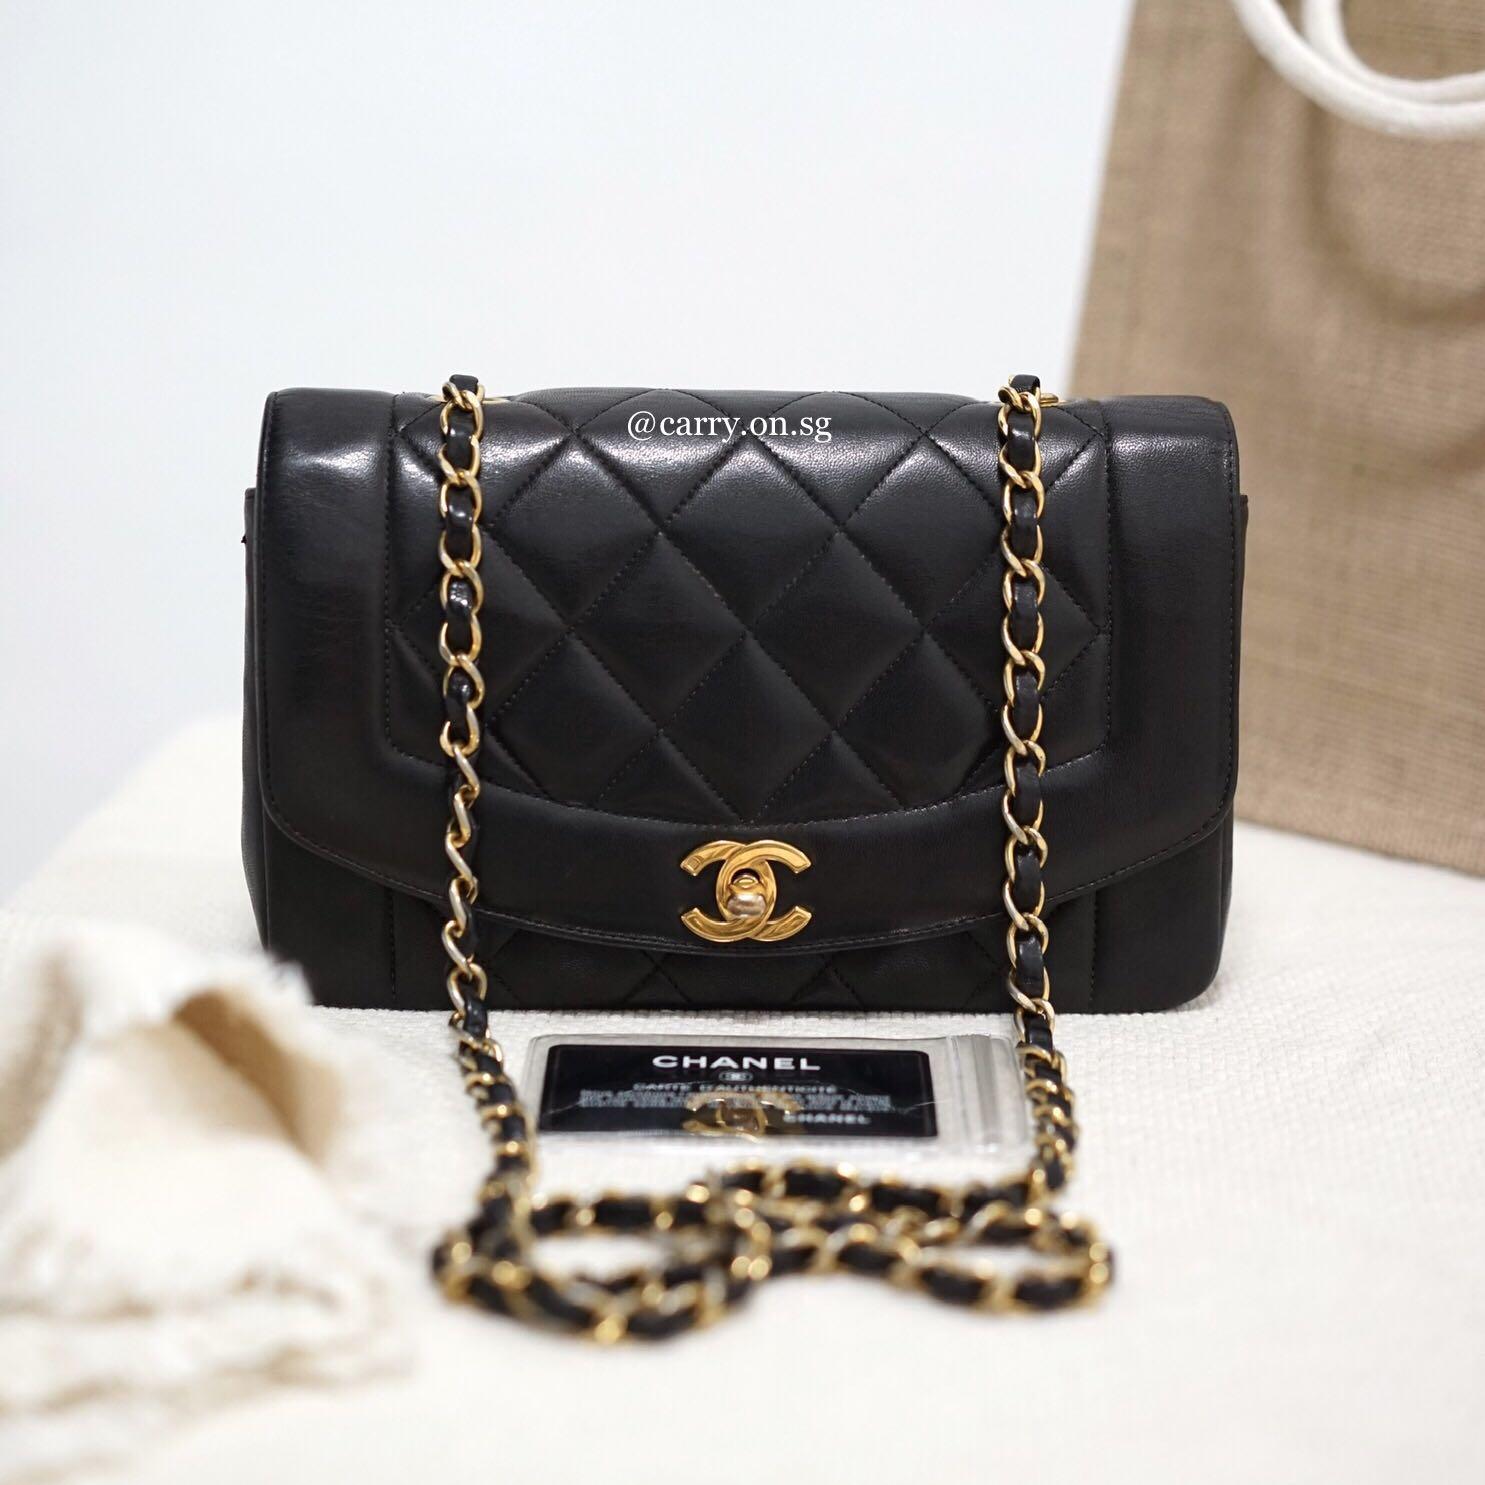 SOLD Before Listing] Chanel Diana in Small Crossbody Flap bag